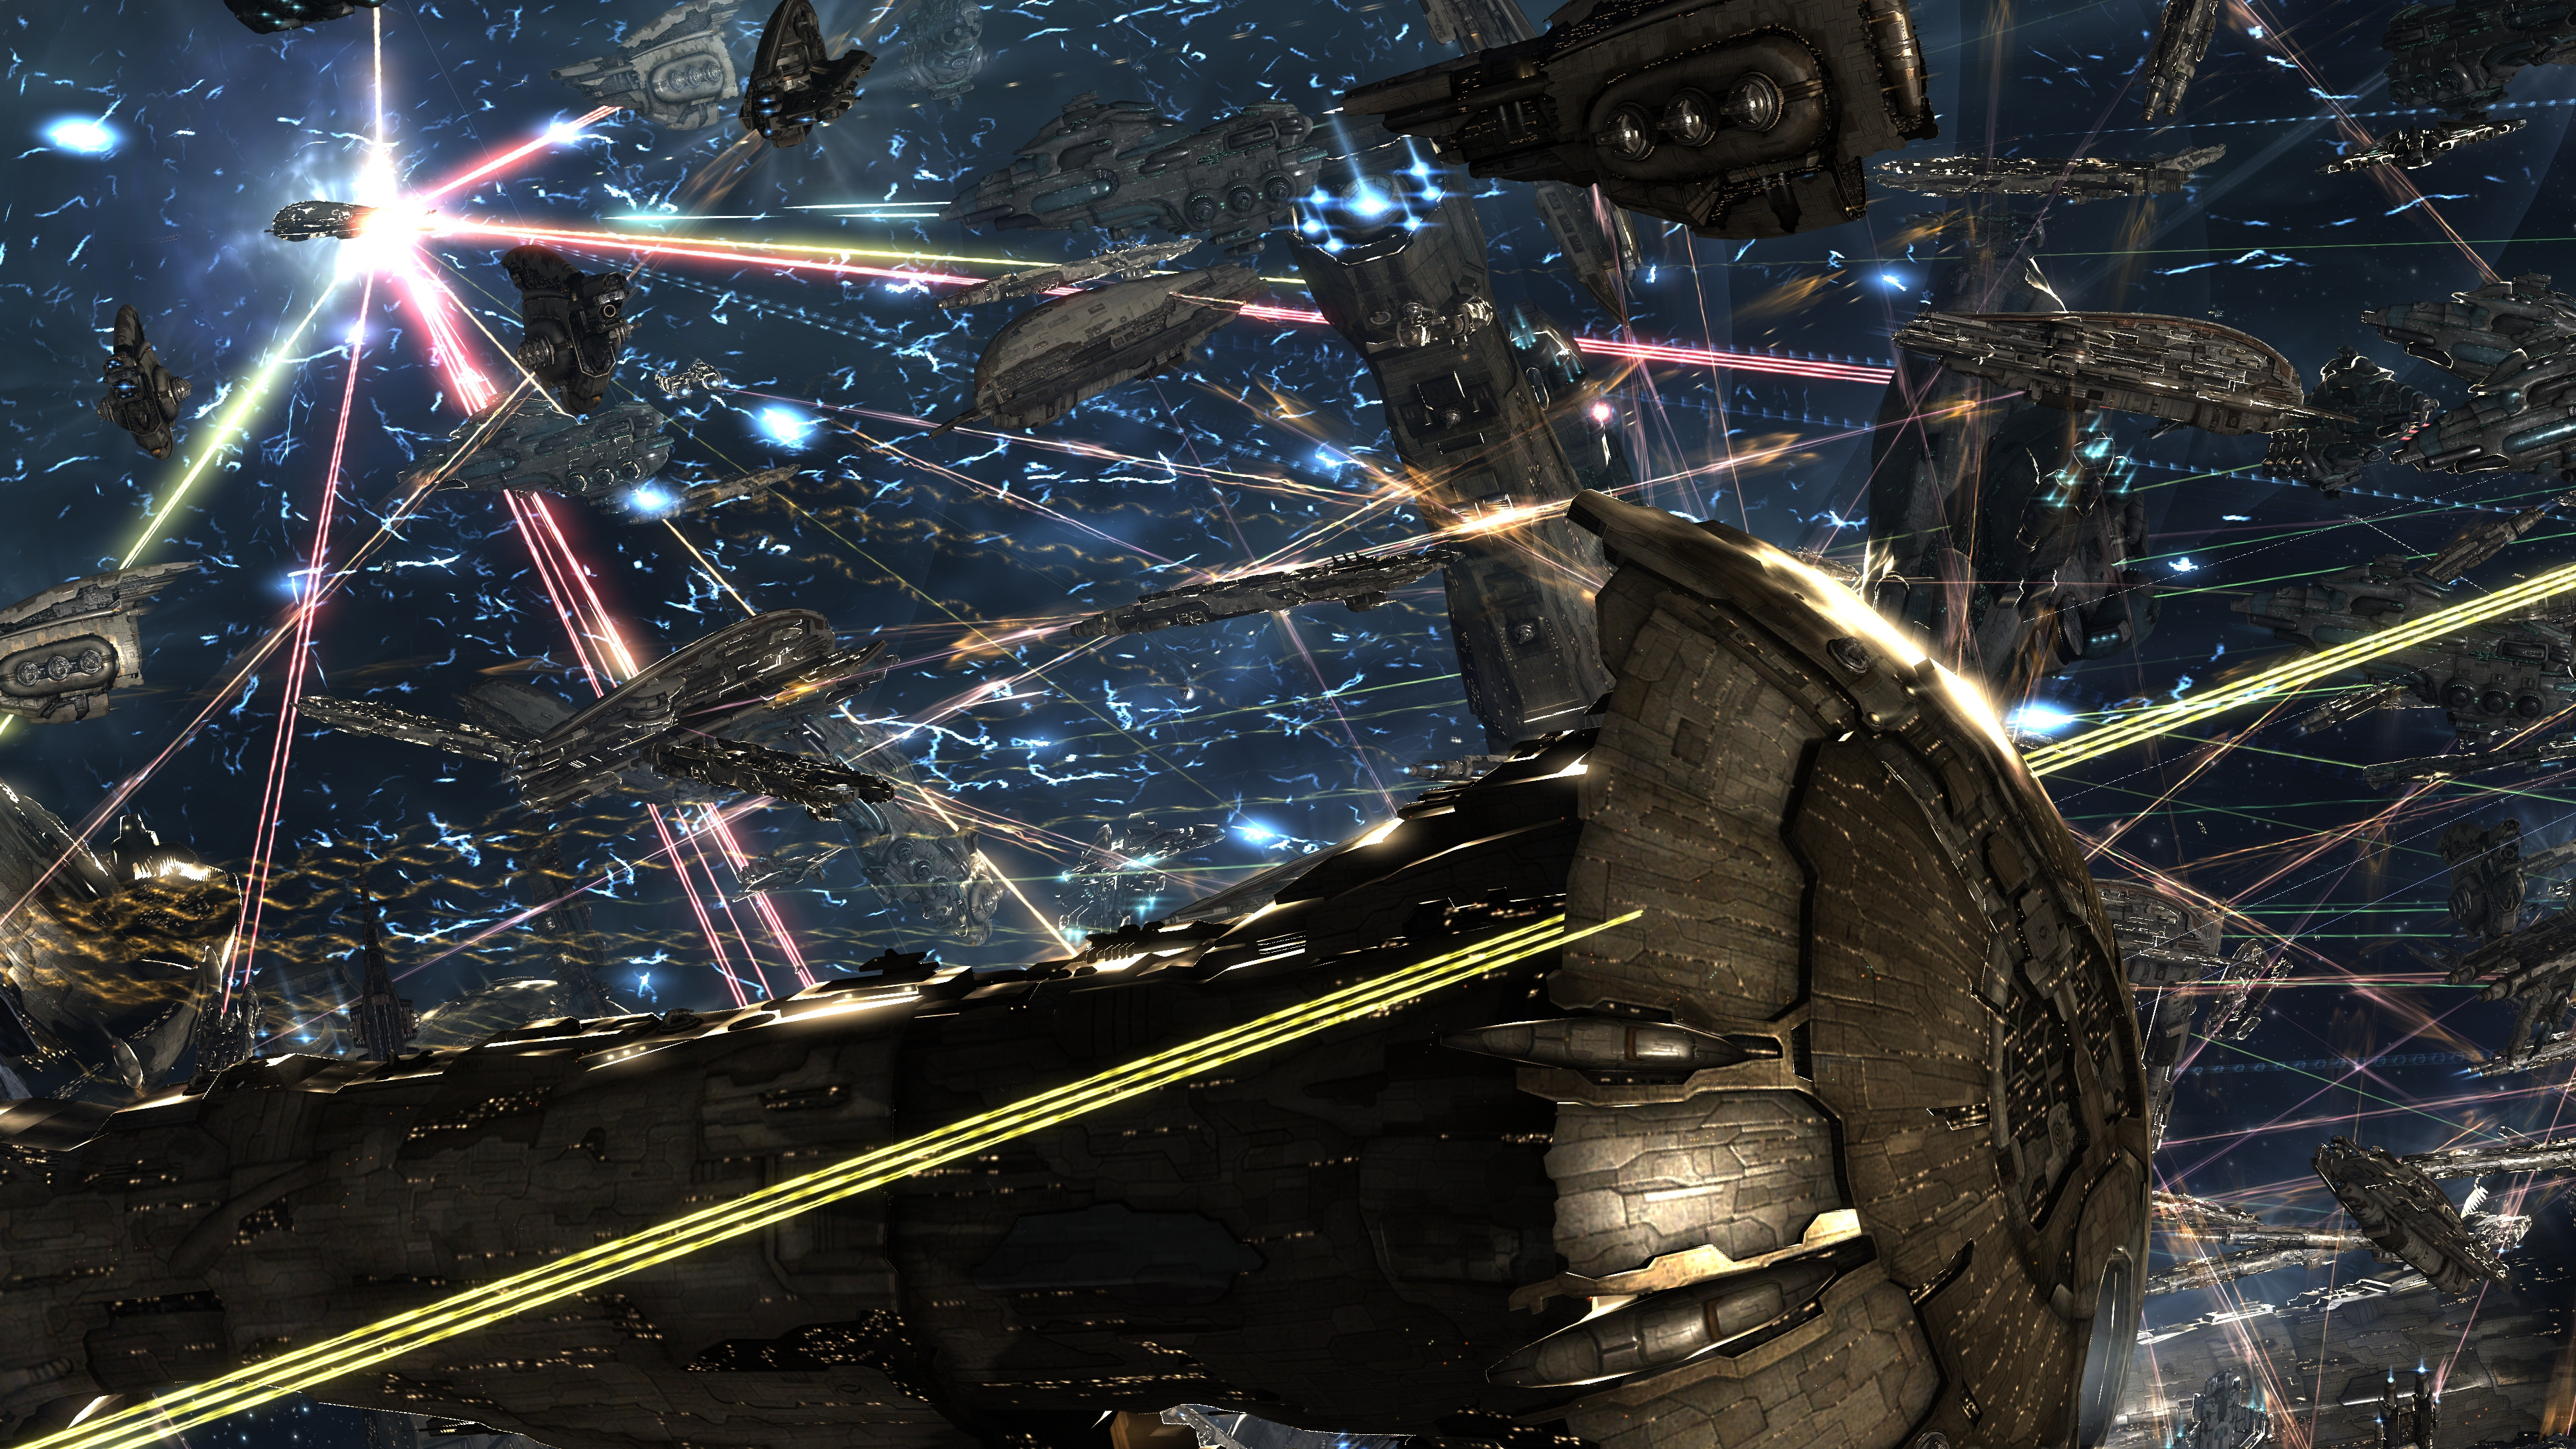 Geek insider, geekinsider, geekinsider. Com,, $340,000 in damages caused by eve online's epic space battle, gaming